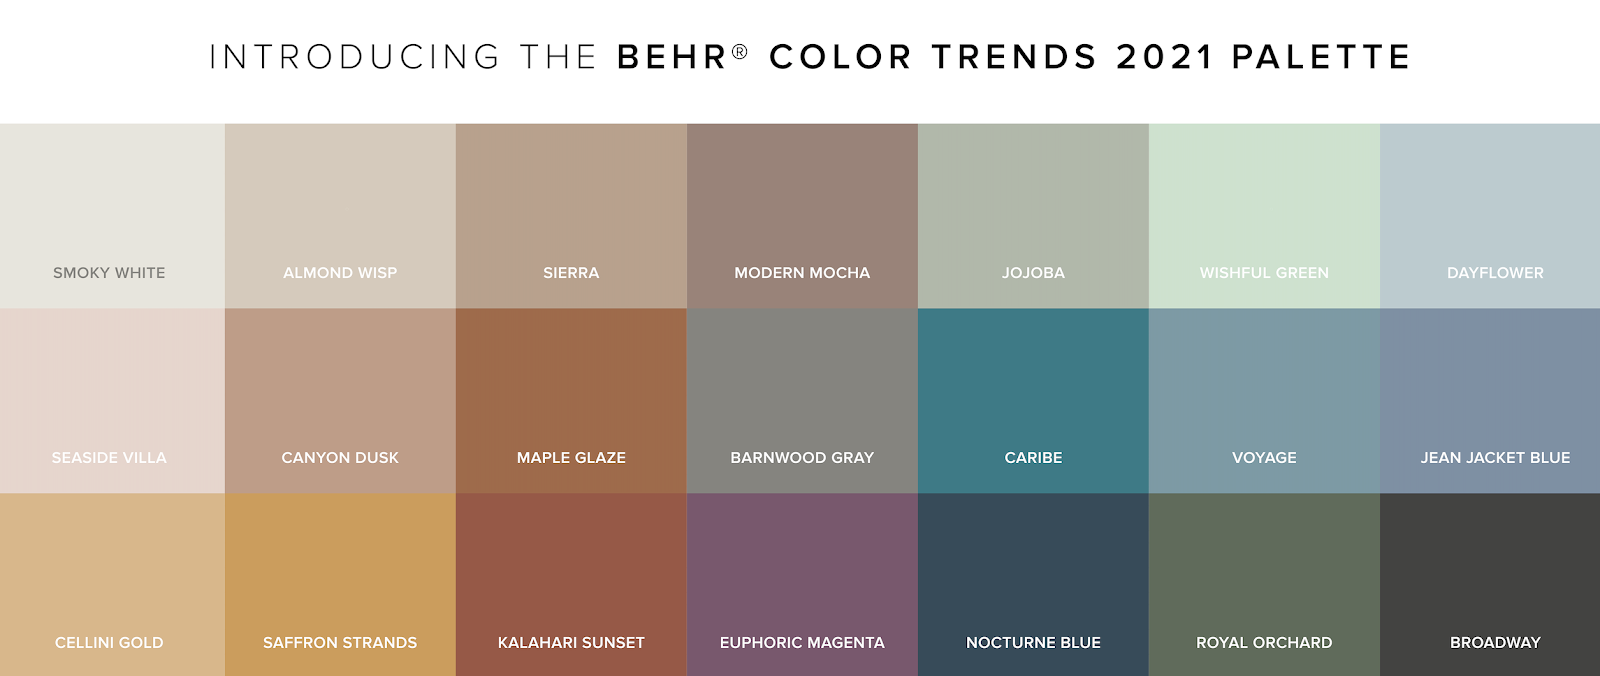 Here is a list of all of the "BEHR Color Trends 2021 Palette" col...